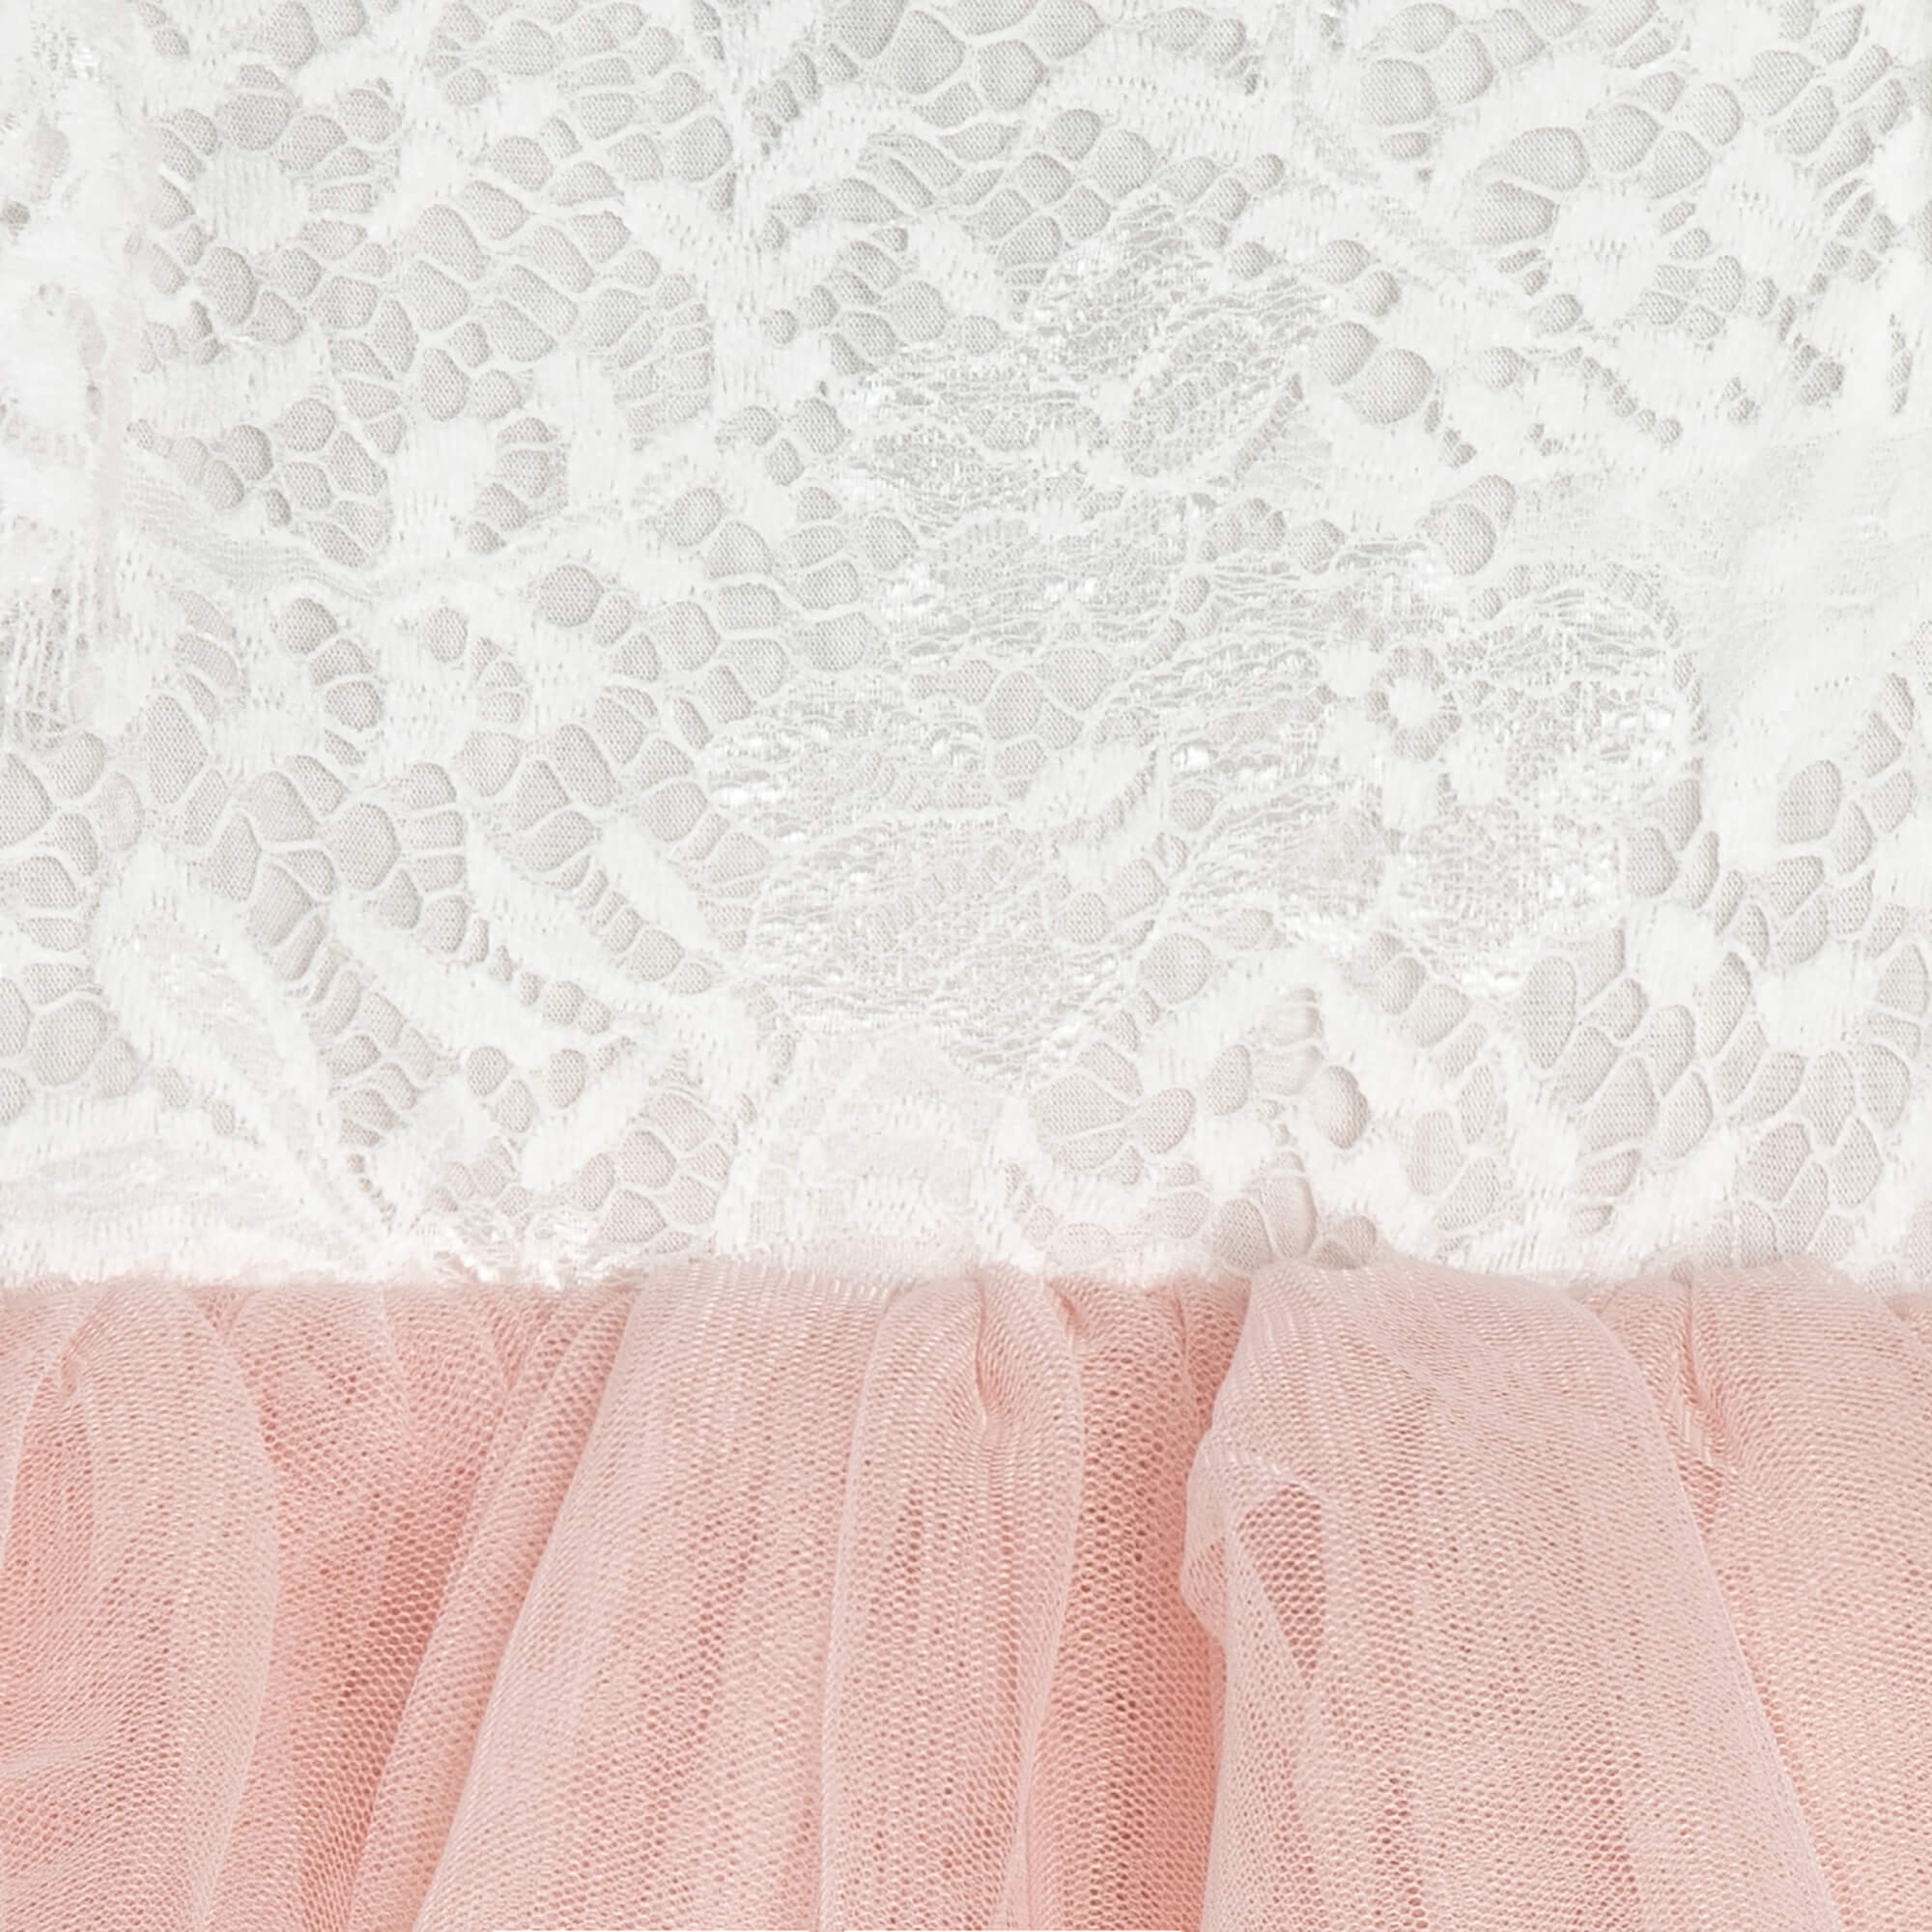 Close up of tulle